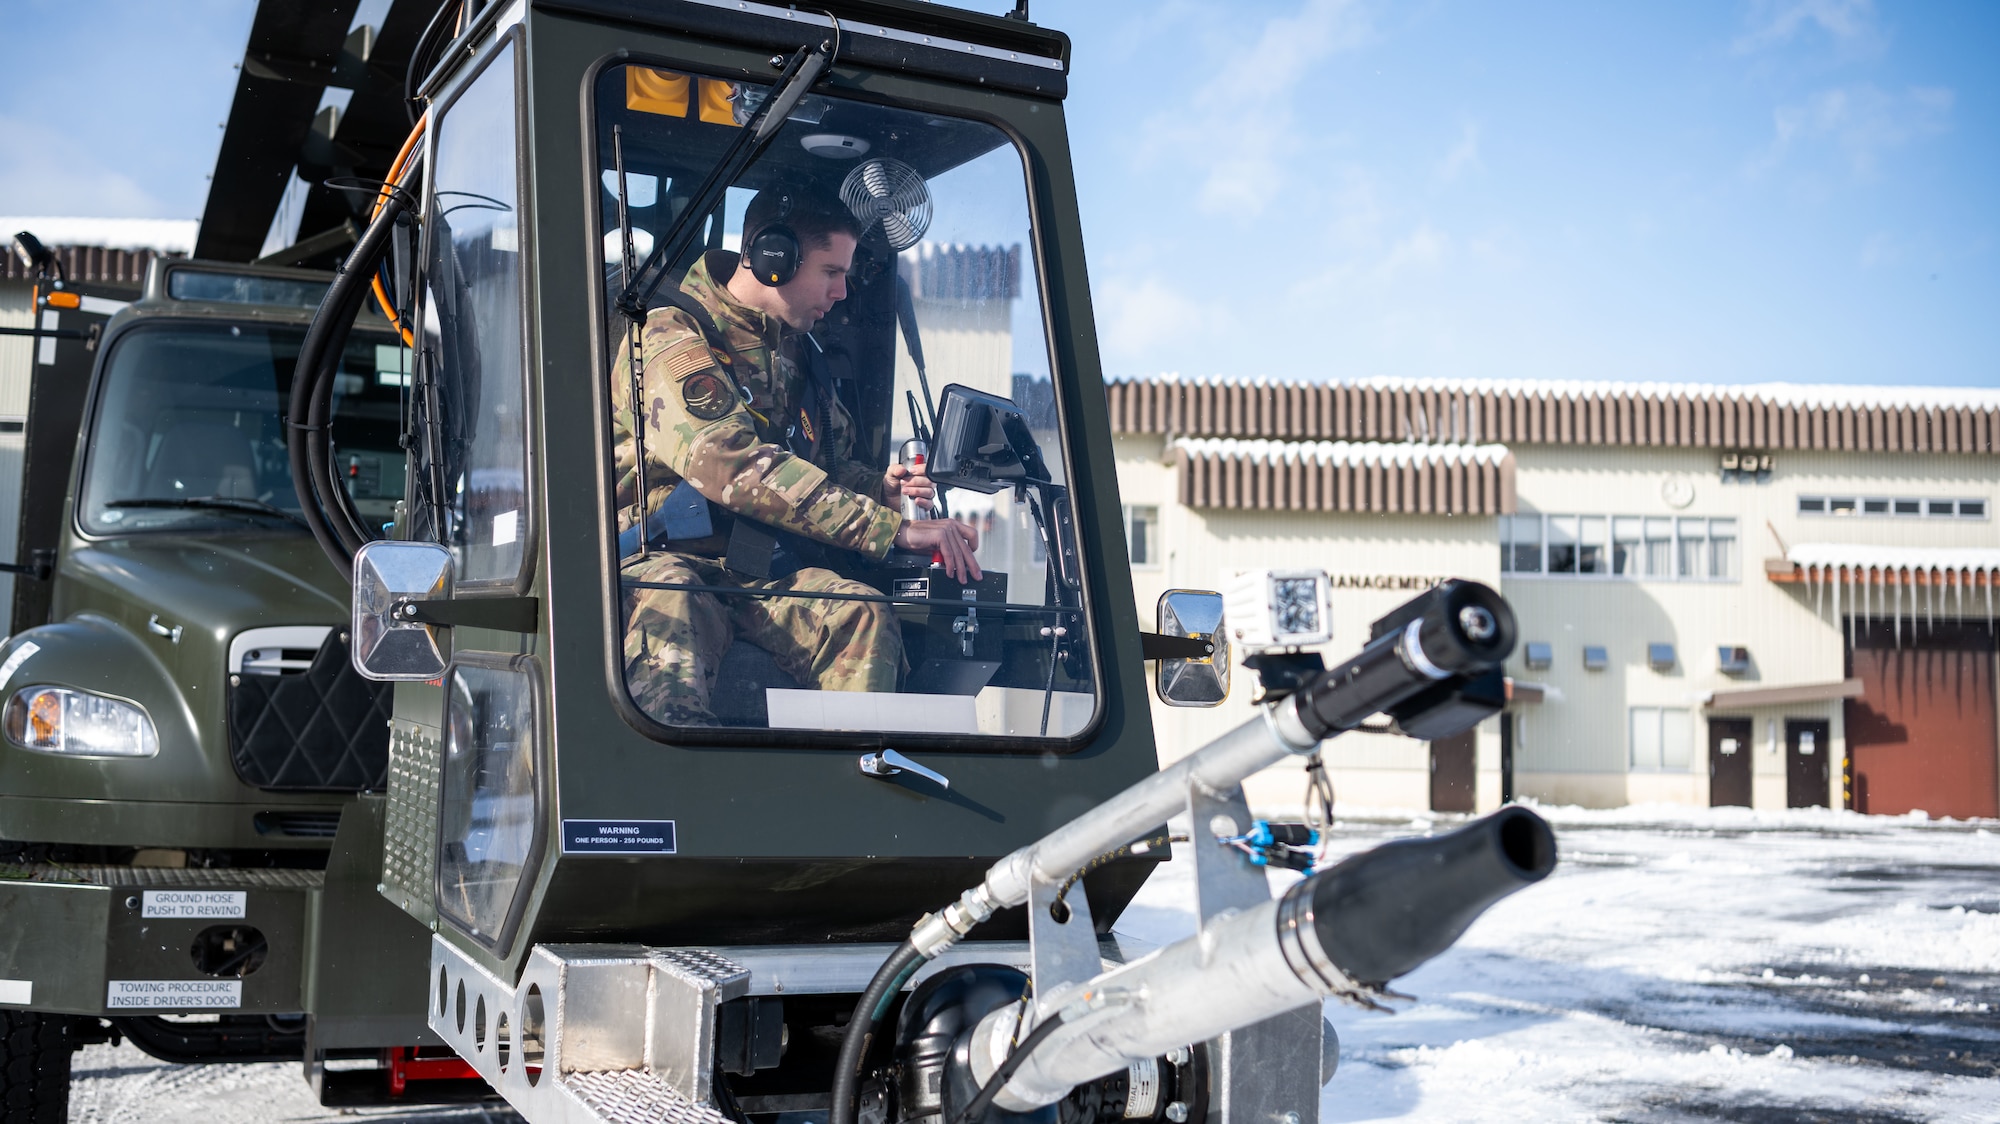 U.S. Airmen assigned to the 35th Logistics Readiness Squadron operate an extended deicer at Misawa Air Base, Japan, Dec. 20, 2022. After the primary deicer broke down beyond repair, 35th Logistics Readiness Squadron members coordinated the arrival of a new deicer to resume the mission of clearing off Misawa Air Bases’ F-16 Fighting Falcons. (U.S. Air Force photo by Staff Sgt. Kristen Heller)